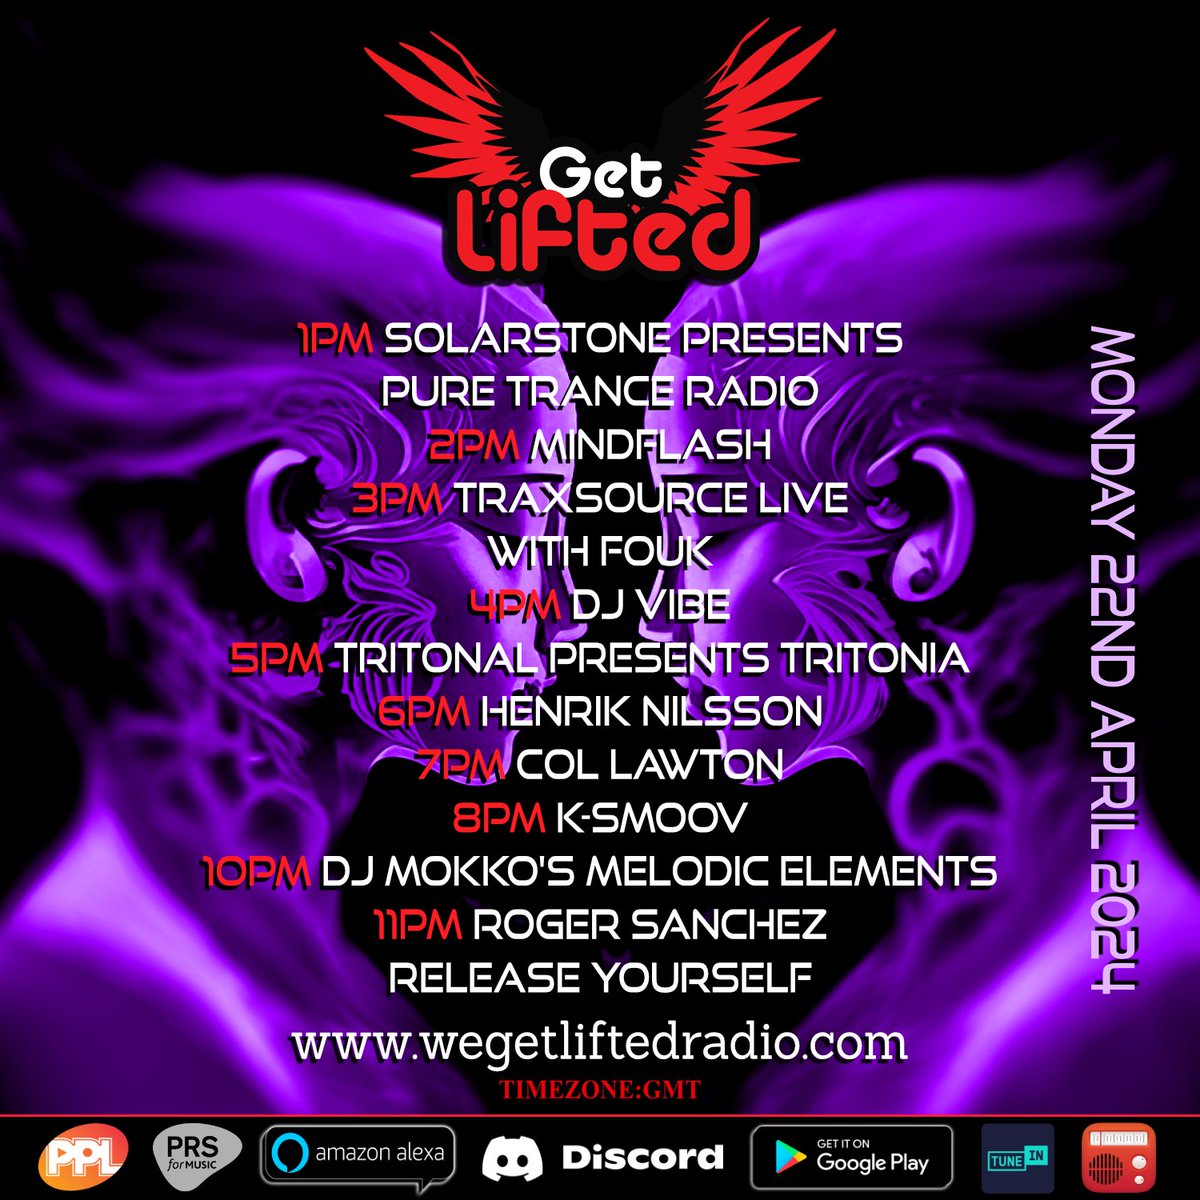 The Monday Reset is back with the best kick start to your week!
Tune in for the best house music.

wegetliftedradio.com mixcloud.com/live/wegetlift… 

#wegetliftedradio #housemusic #radio #newmusic #afrohouse #melodichouse #progressivehouse